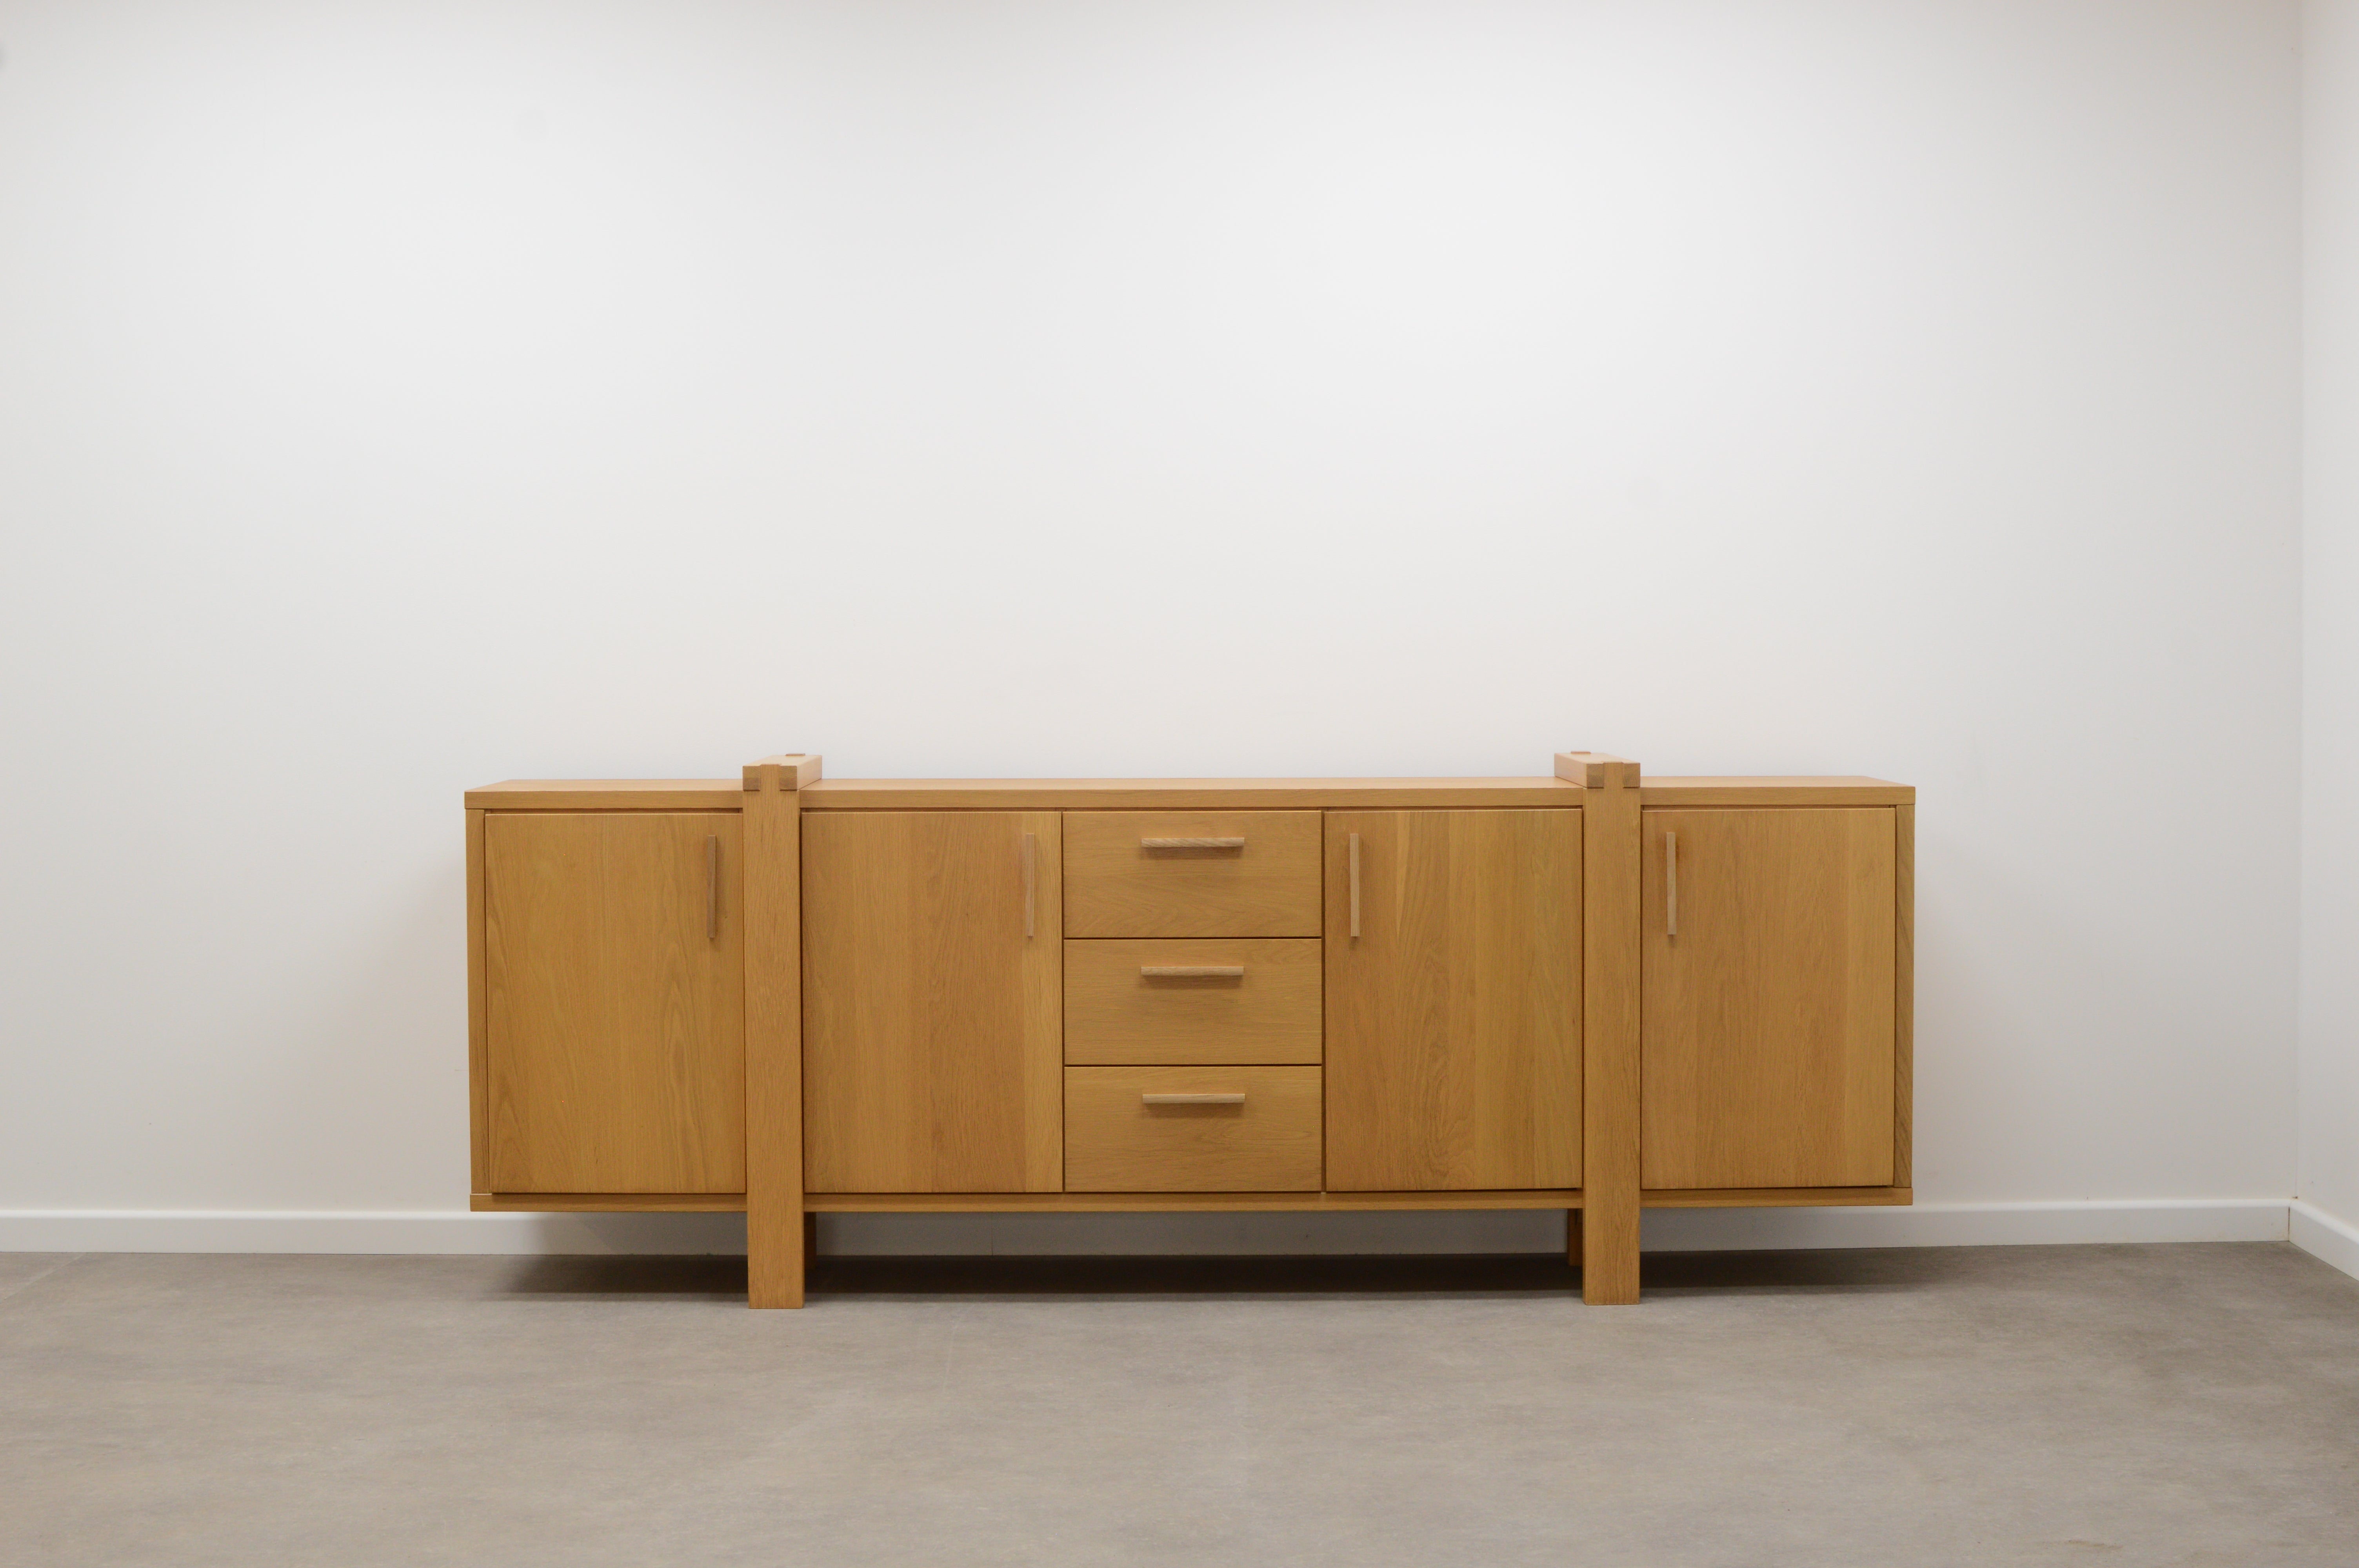 Large Belgium oak sideboard. Mostly made of solid oak. 3 drawers and 4 doors. Behind every door are modular shelfs. In very good vintage condition.
